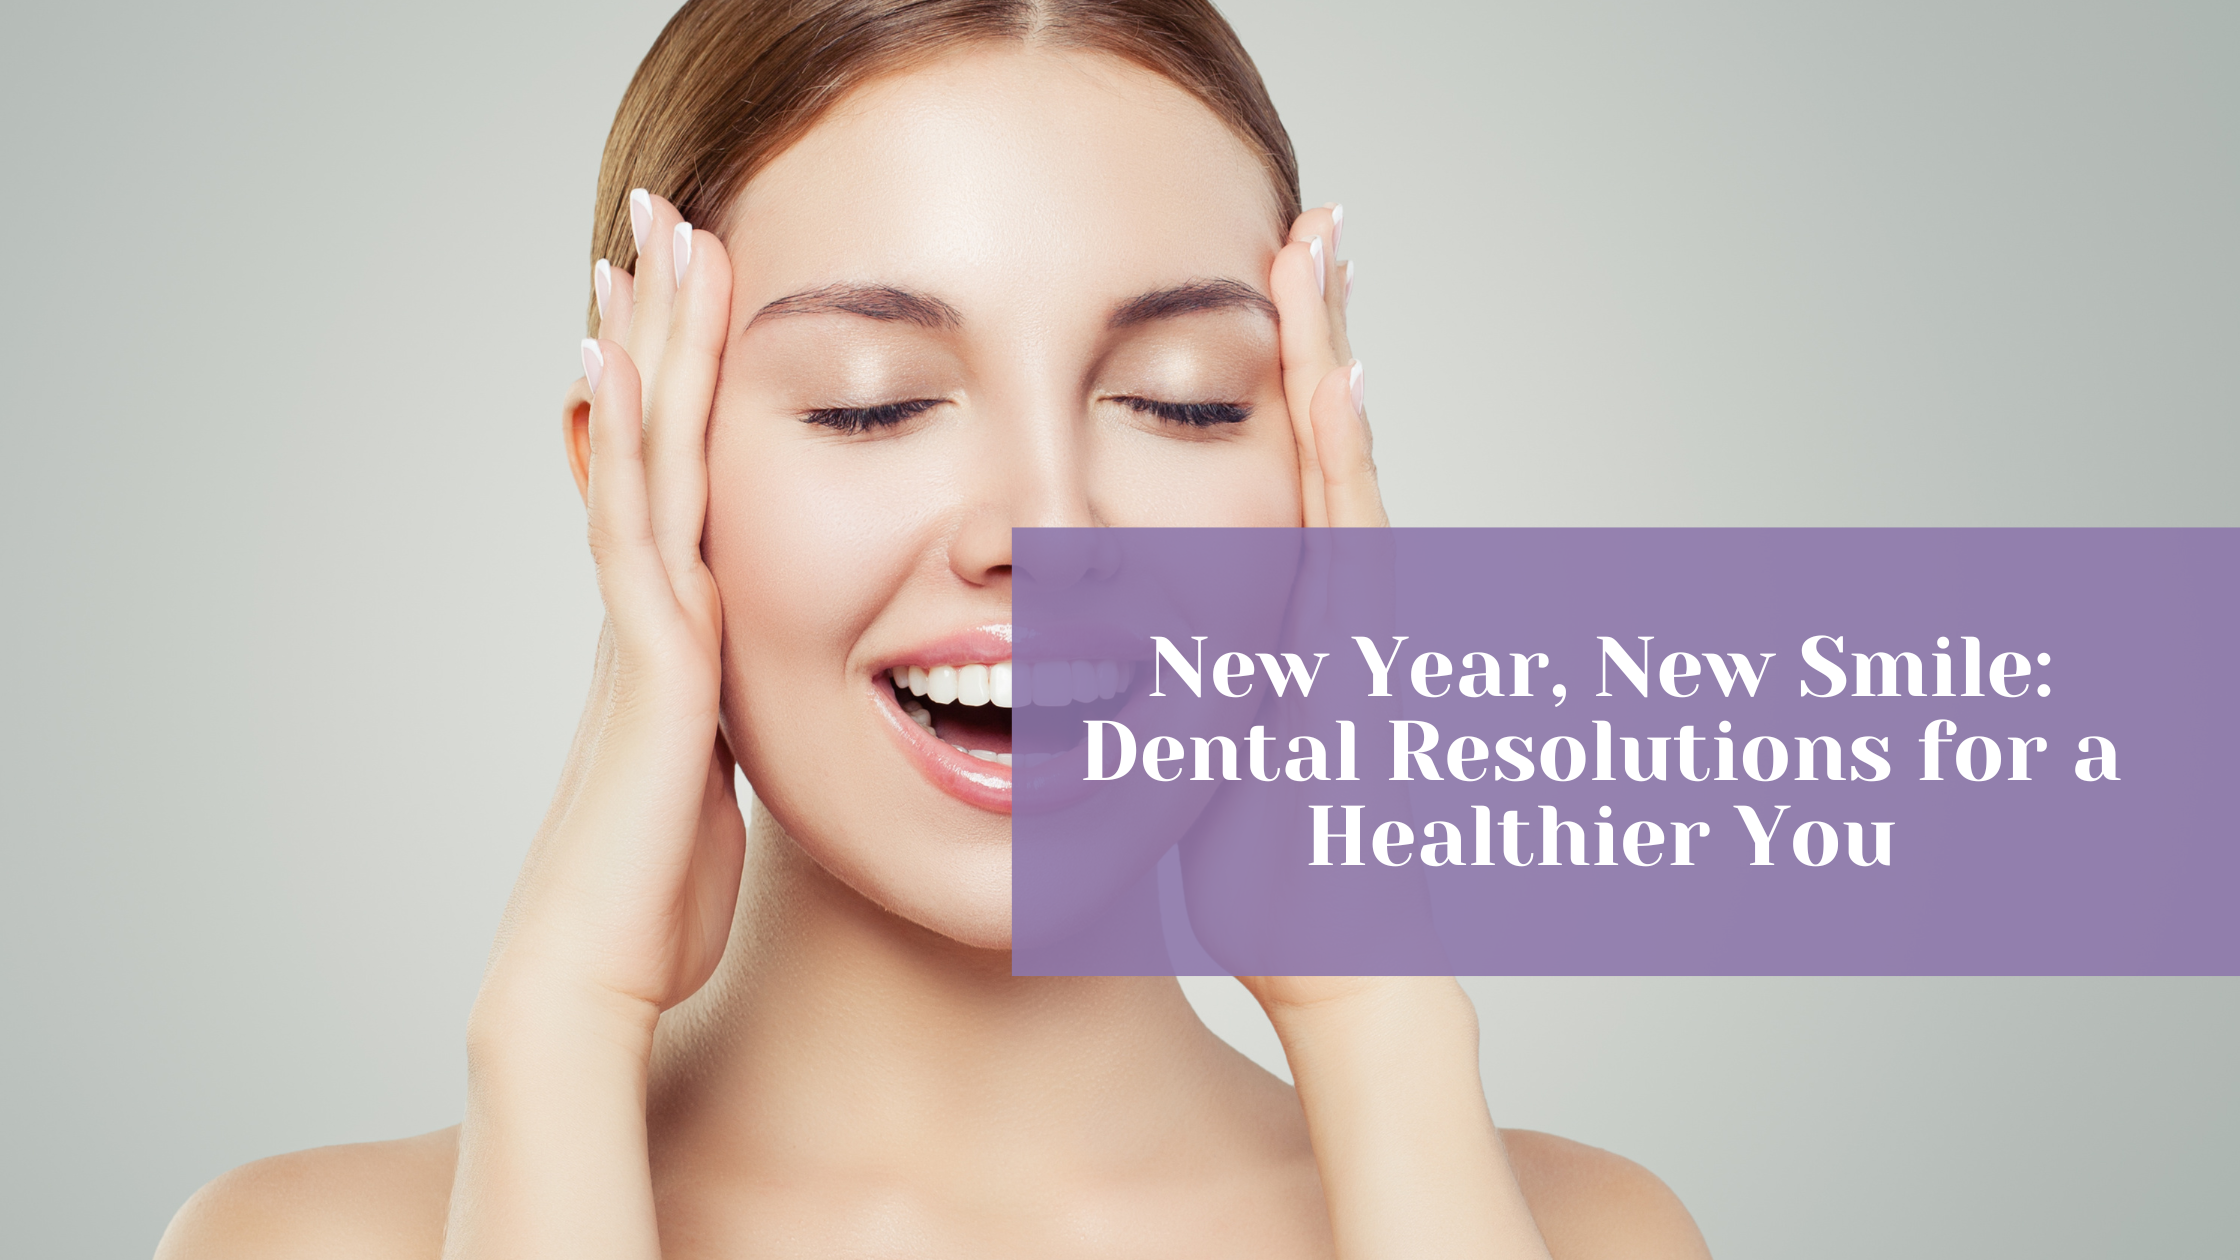 New Year, New Smile: Dental Resolutions for a Healthier You